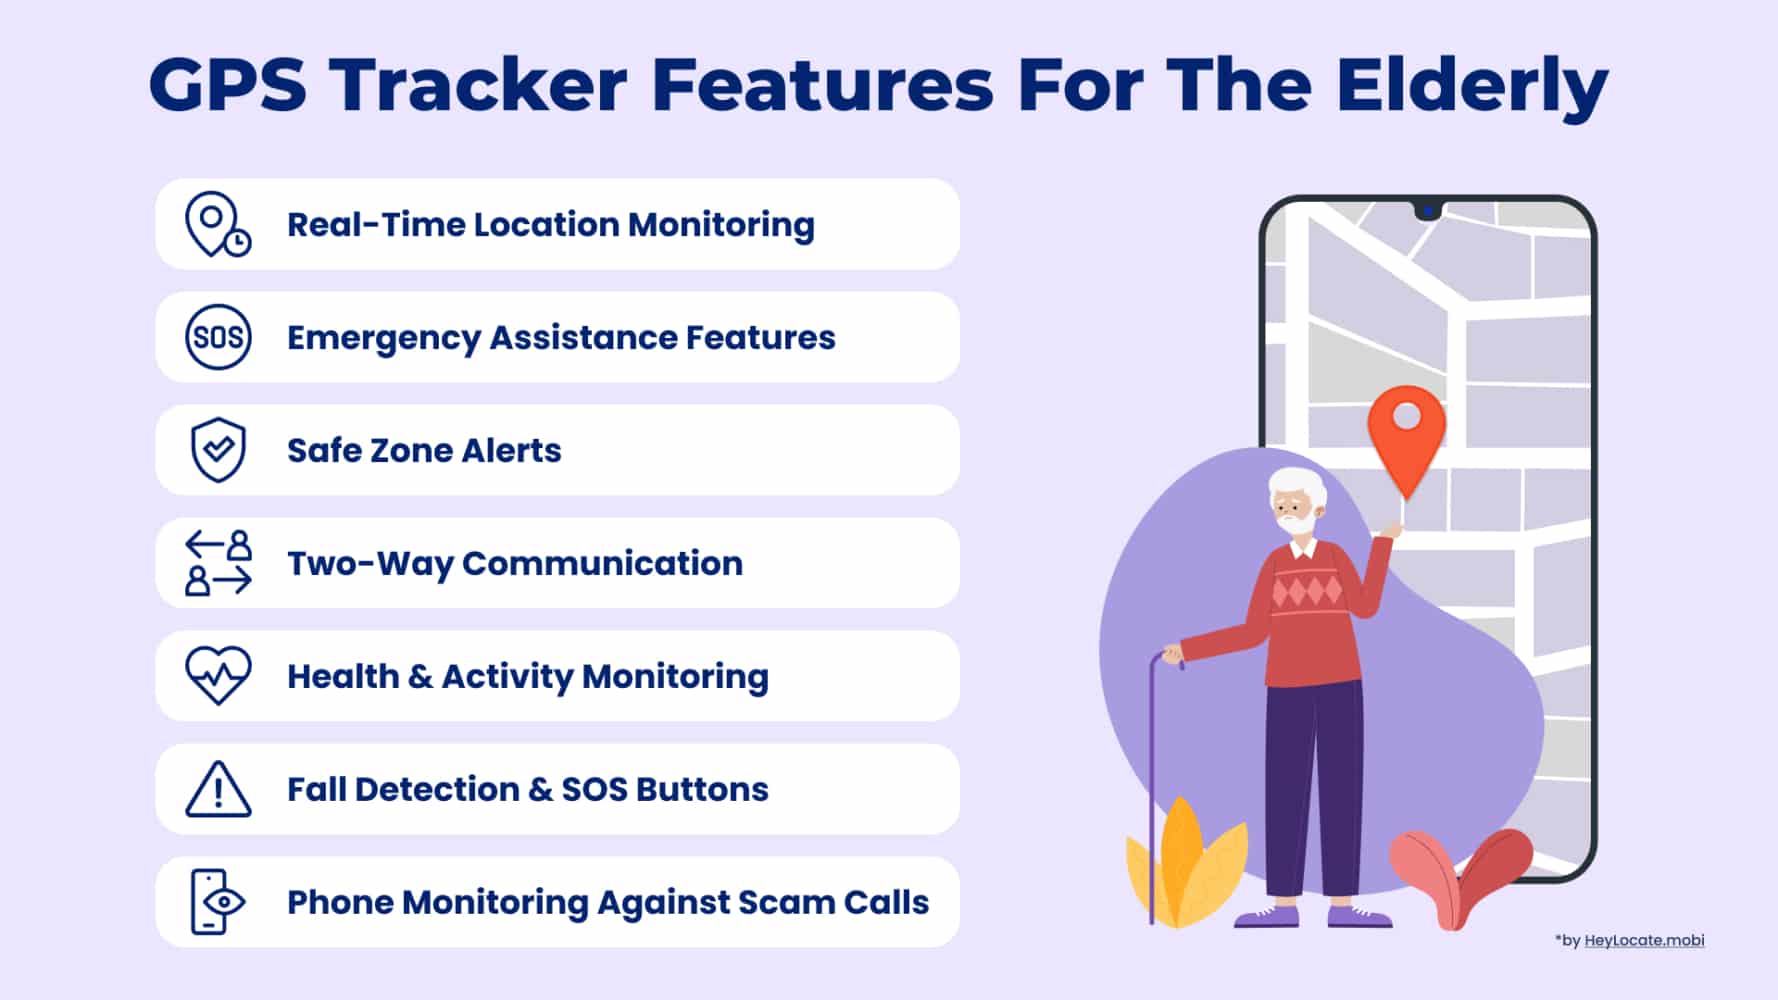 List of main features of GPS tracker for the elderly shown in HeyLocate infographic